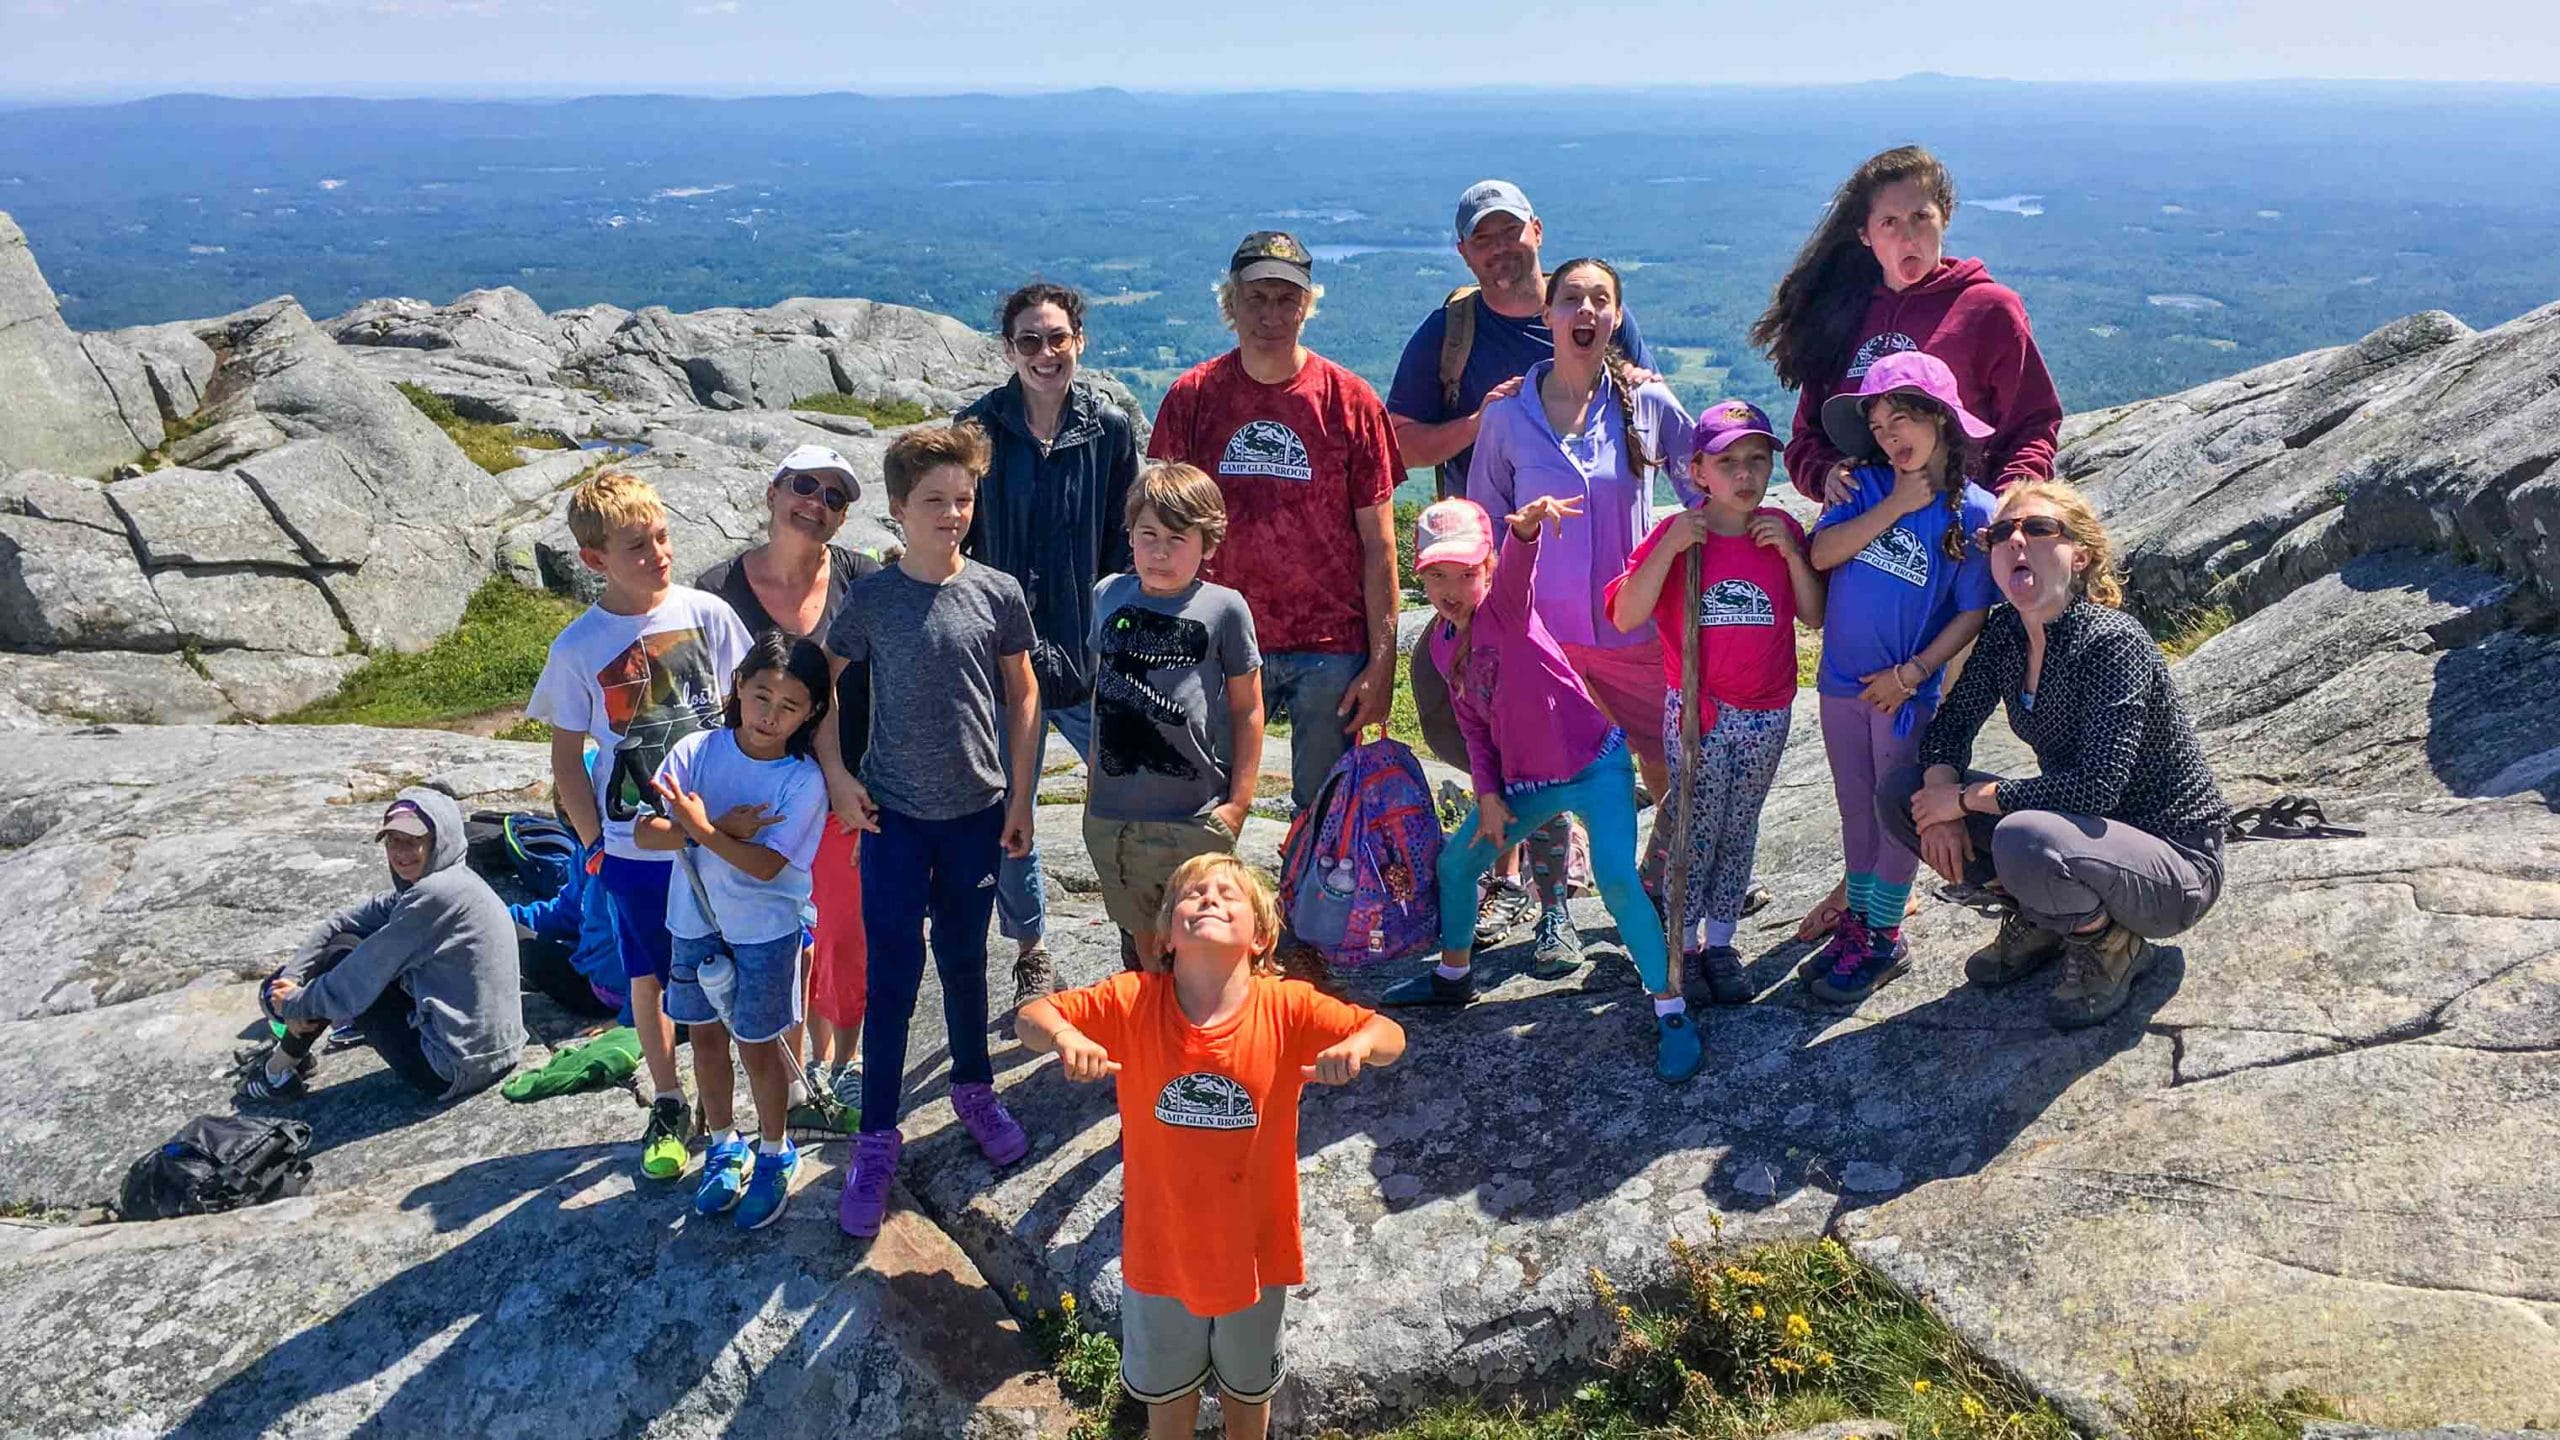 A group of family campers hiking on a mountain.